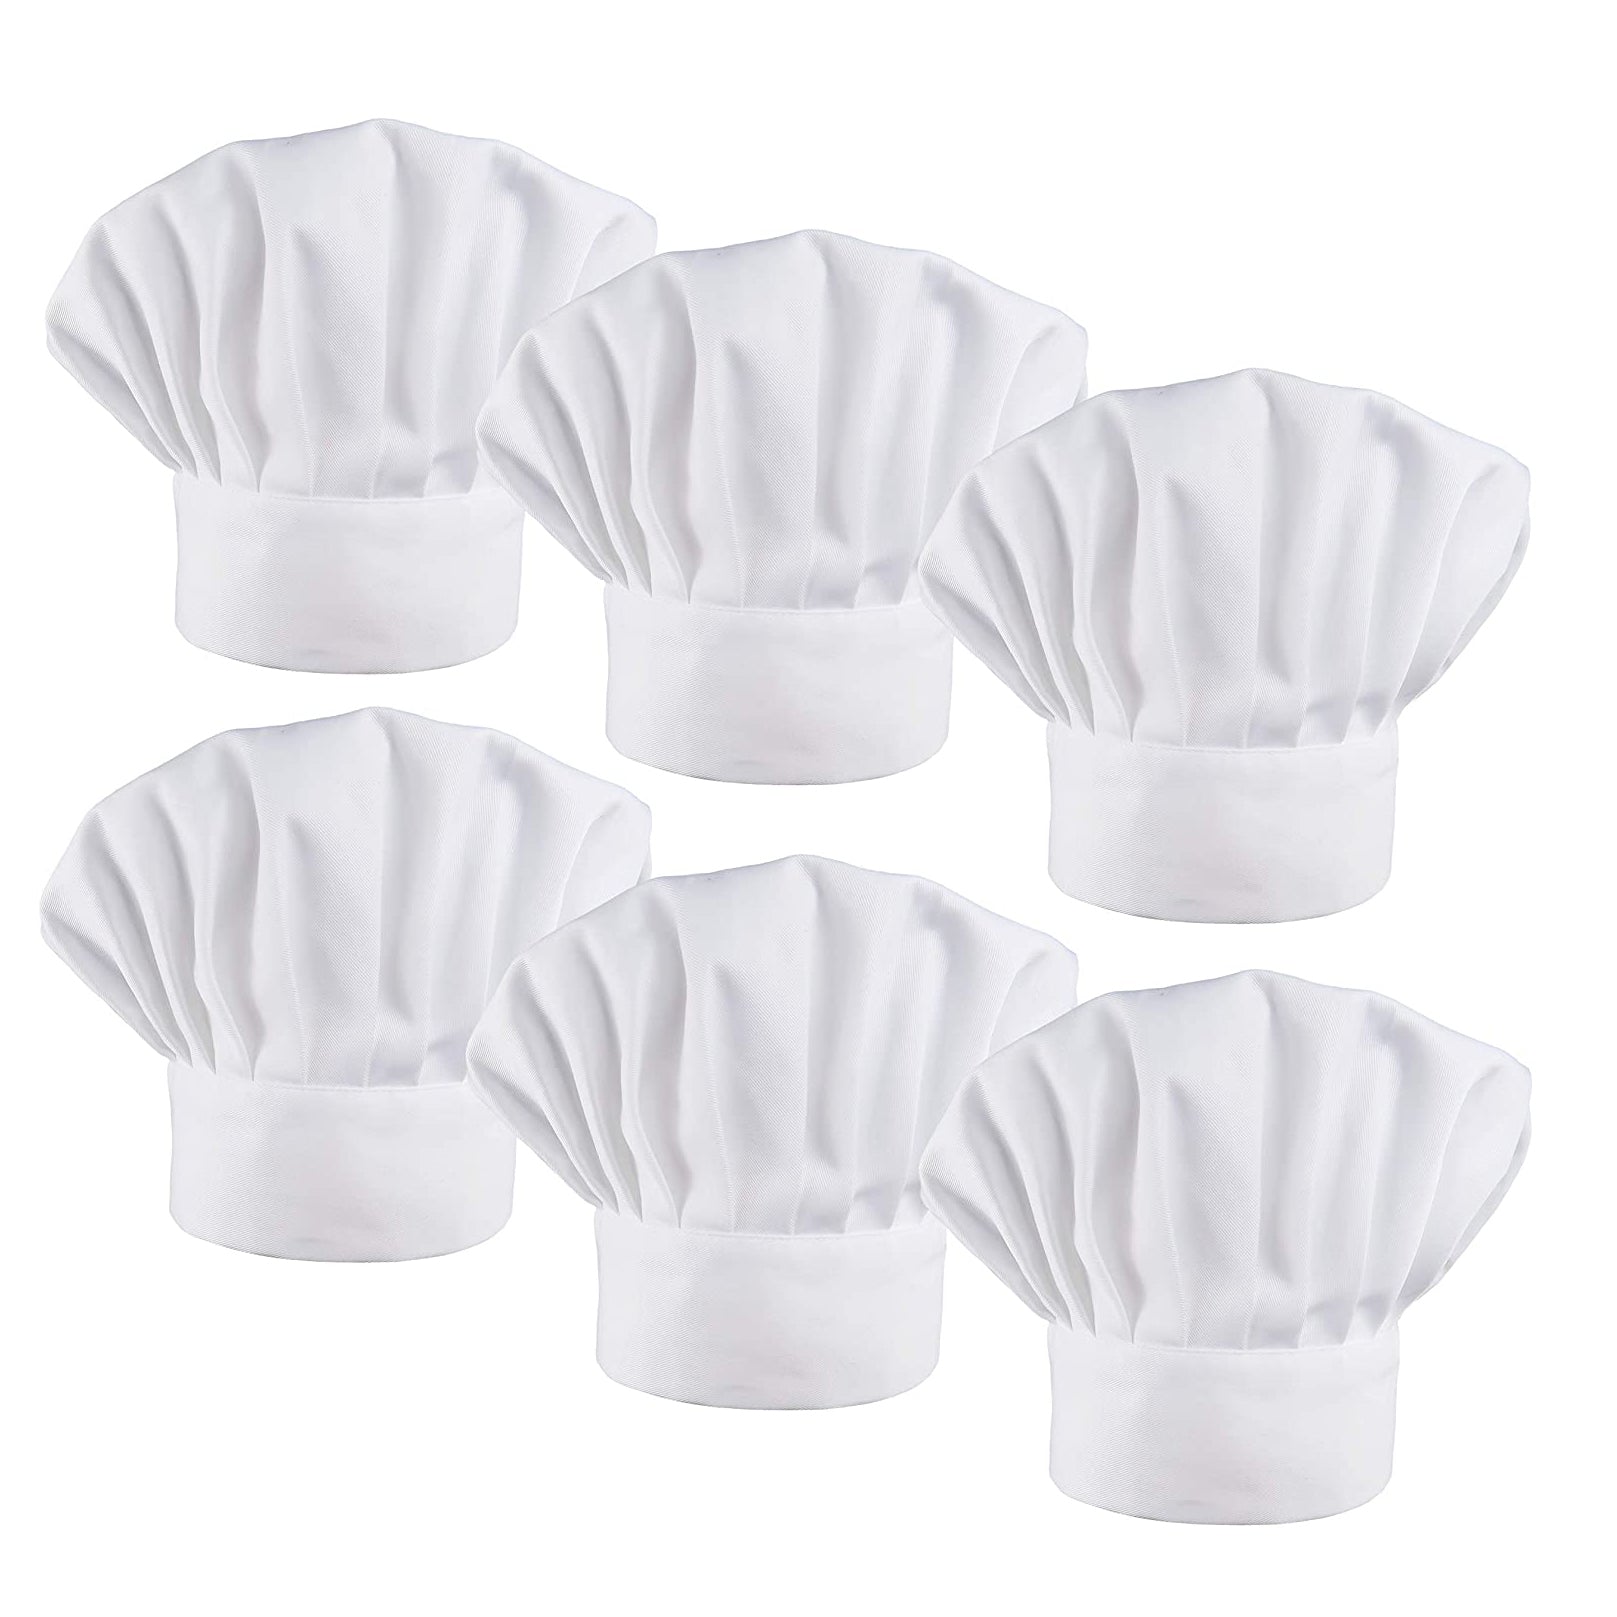 6 Pack Chef Hat Set Elastic Baker Kitchen Catering Cooking Chefs Hats